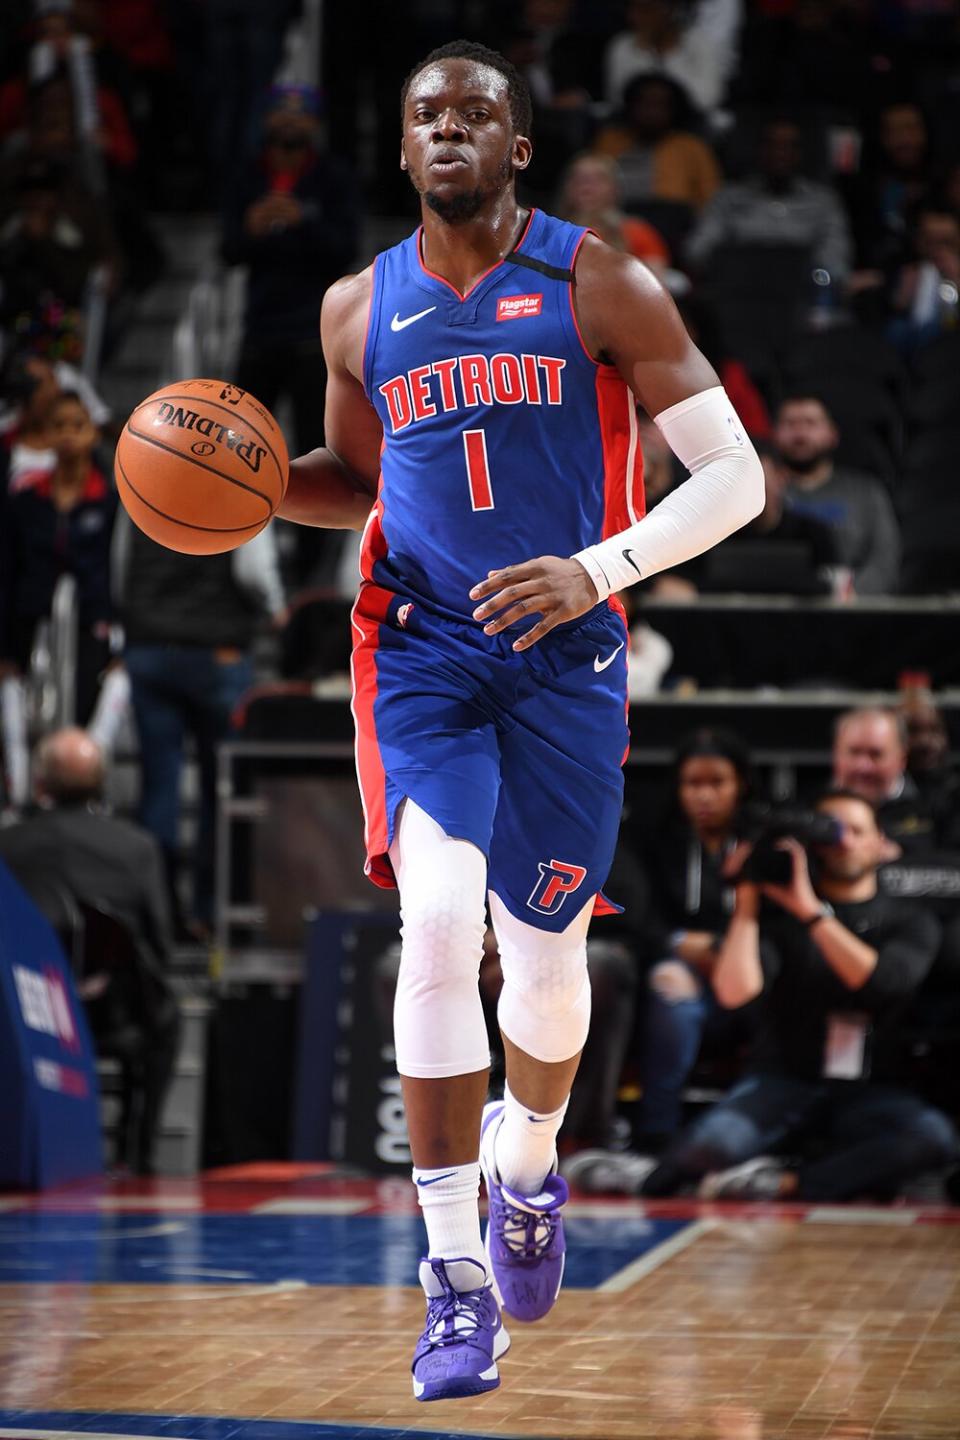 DETROIT, MI - FEBRUARY 5: Reggie Jackson #1 of the Detroit Pistons handles the ball against the Phoenix Suns on February 5, 2020 at Little Caesars Arena in Detroit, Michigan. NOTE TO USER: User expressly acknowledges and agrees that, by downloading and/or using this photograph, User is consenting to the terms and conditions of the Getty Images License Agreement. Mandatory Copyright Notice: Copyright 2020 NBAE (Photo by Chris Schwegler/NBAE via Getty Images)